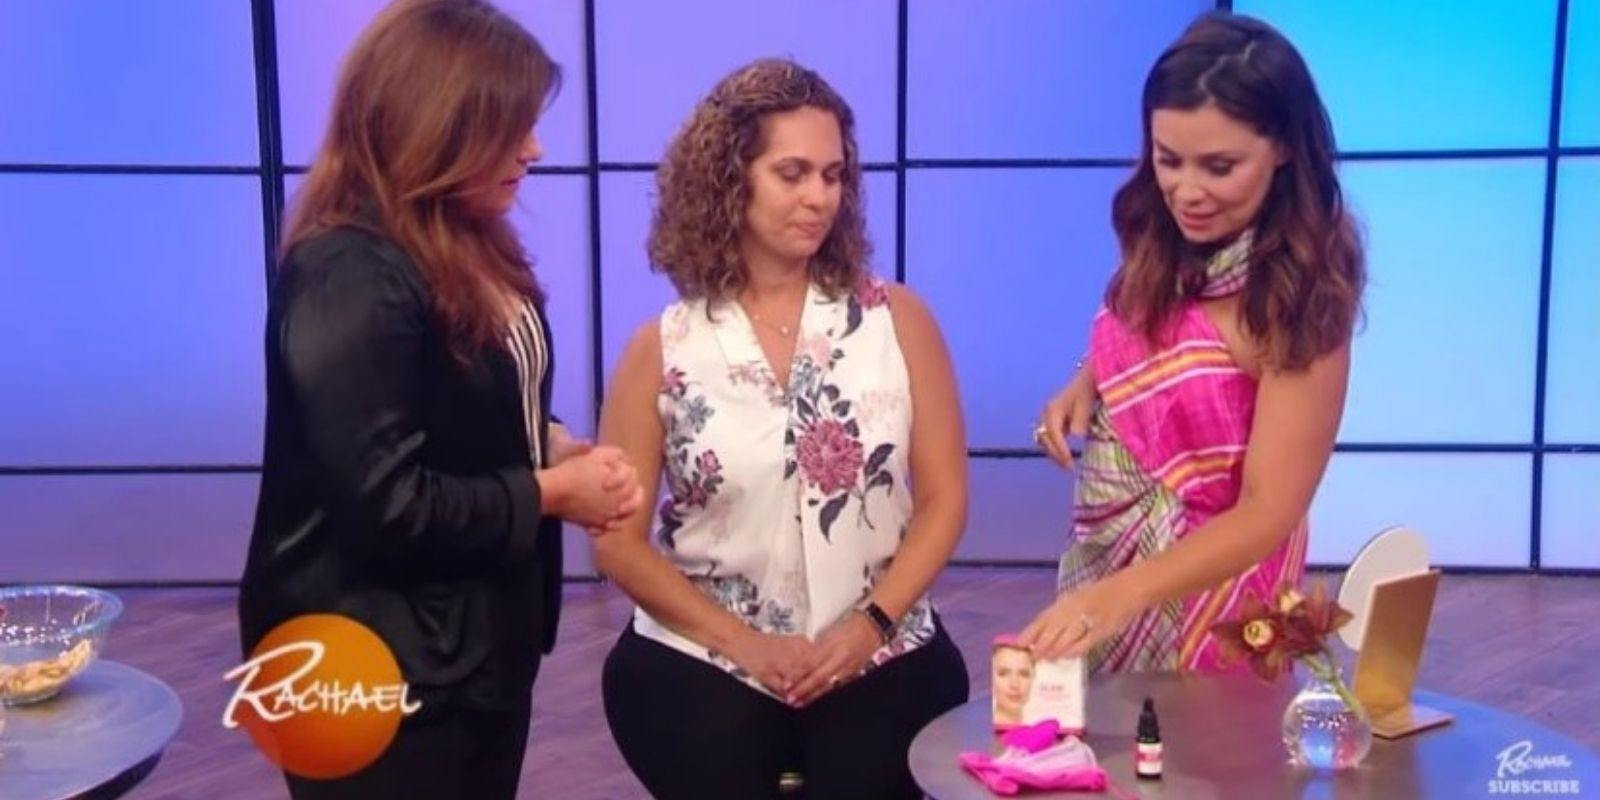 Lure Essentials GLAM Facial Cupping featured on the Rachael Ray Show - Lure Essentials